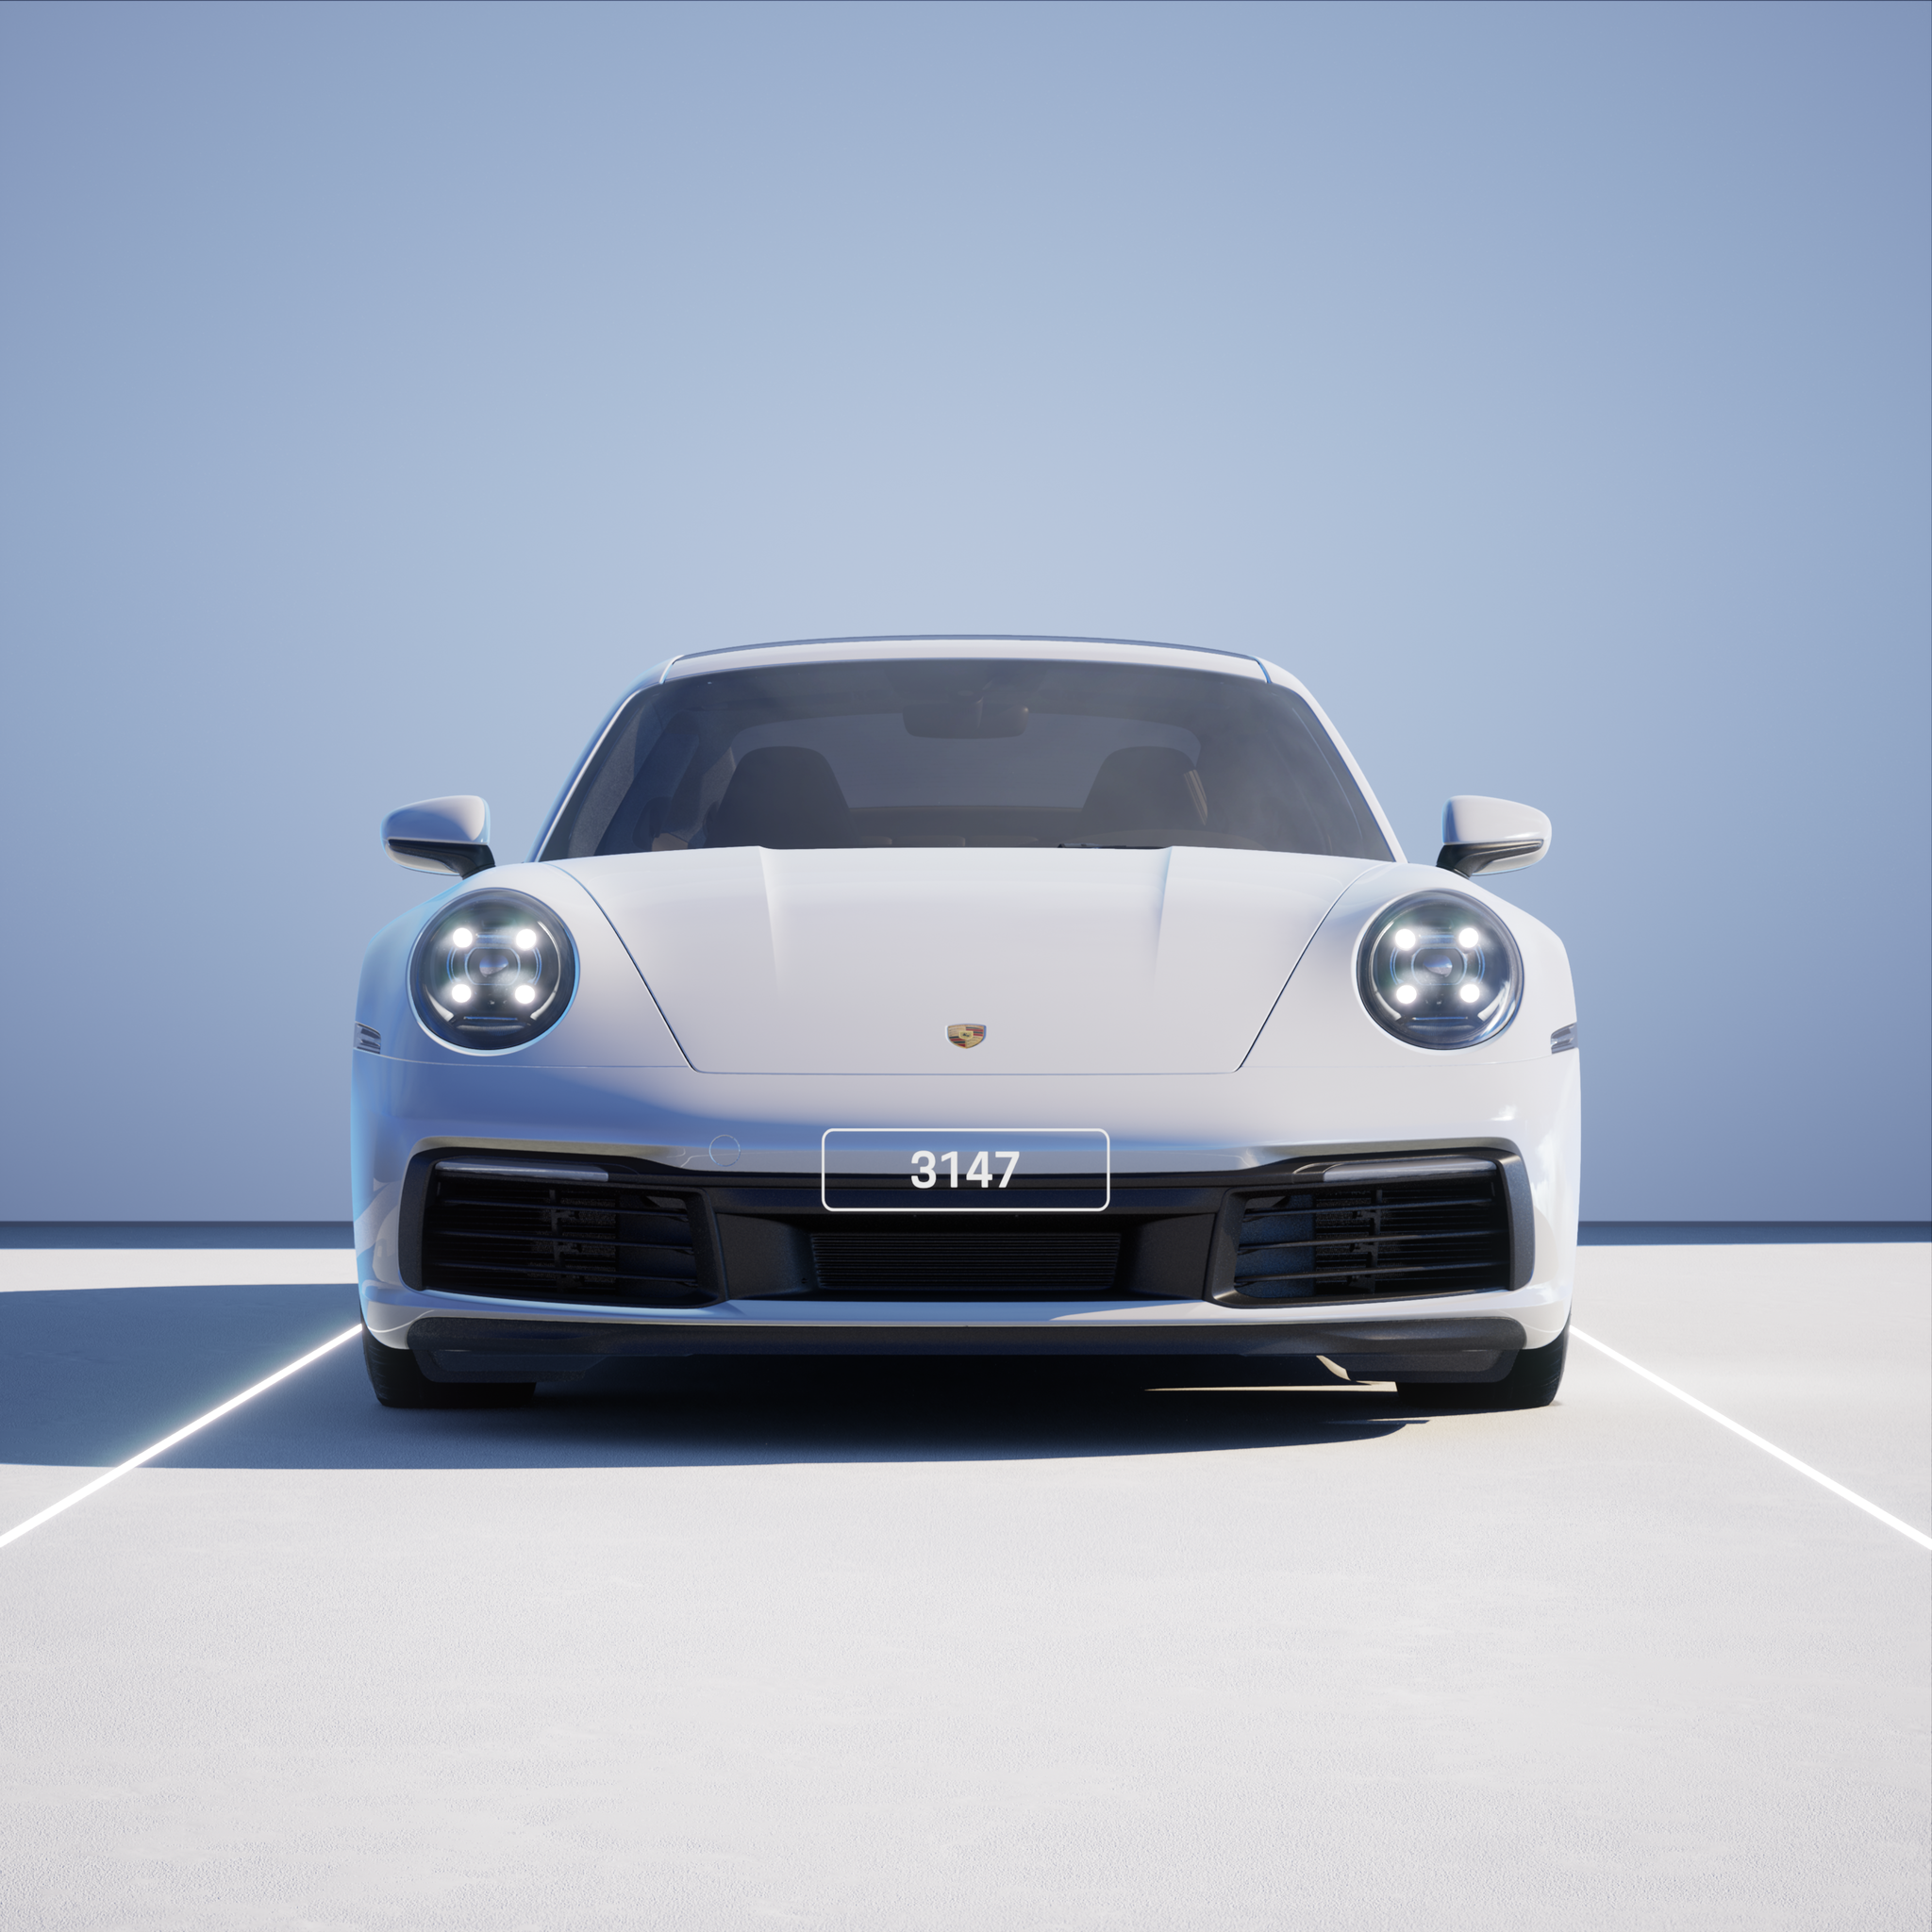 The PORSCHΞ 911 3147 image in phase